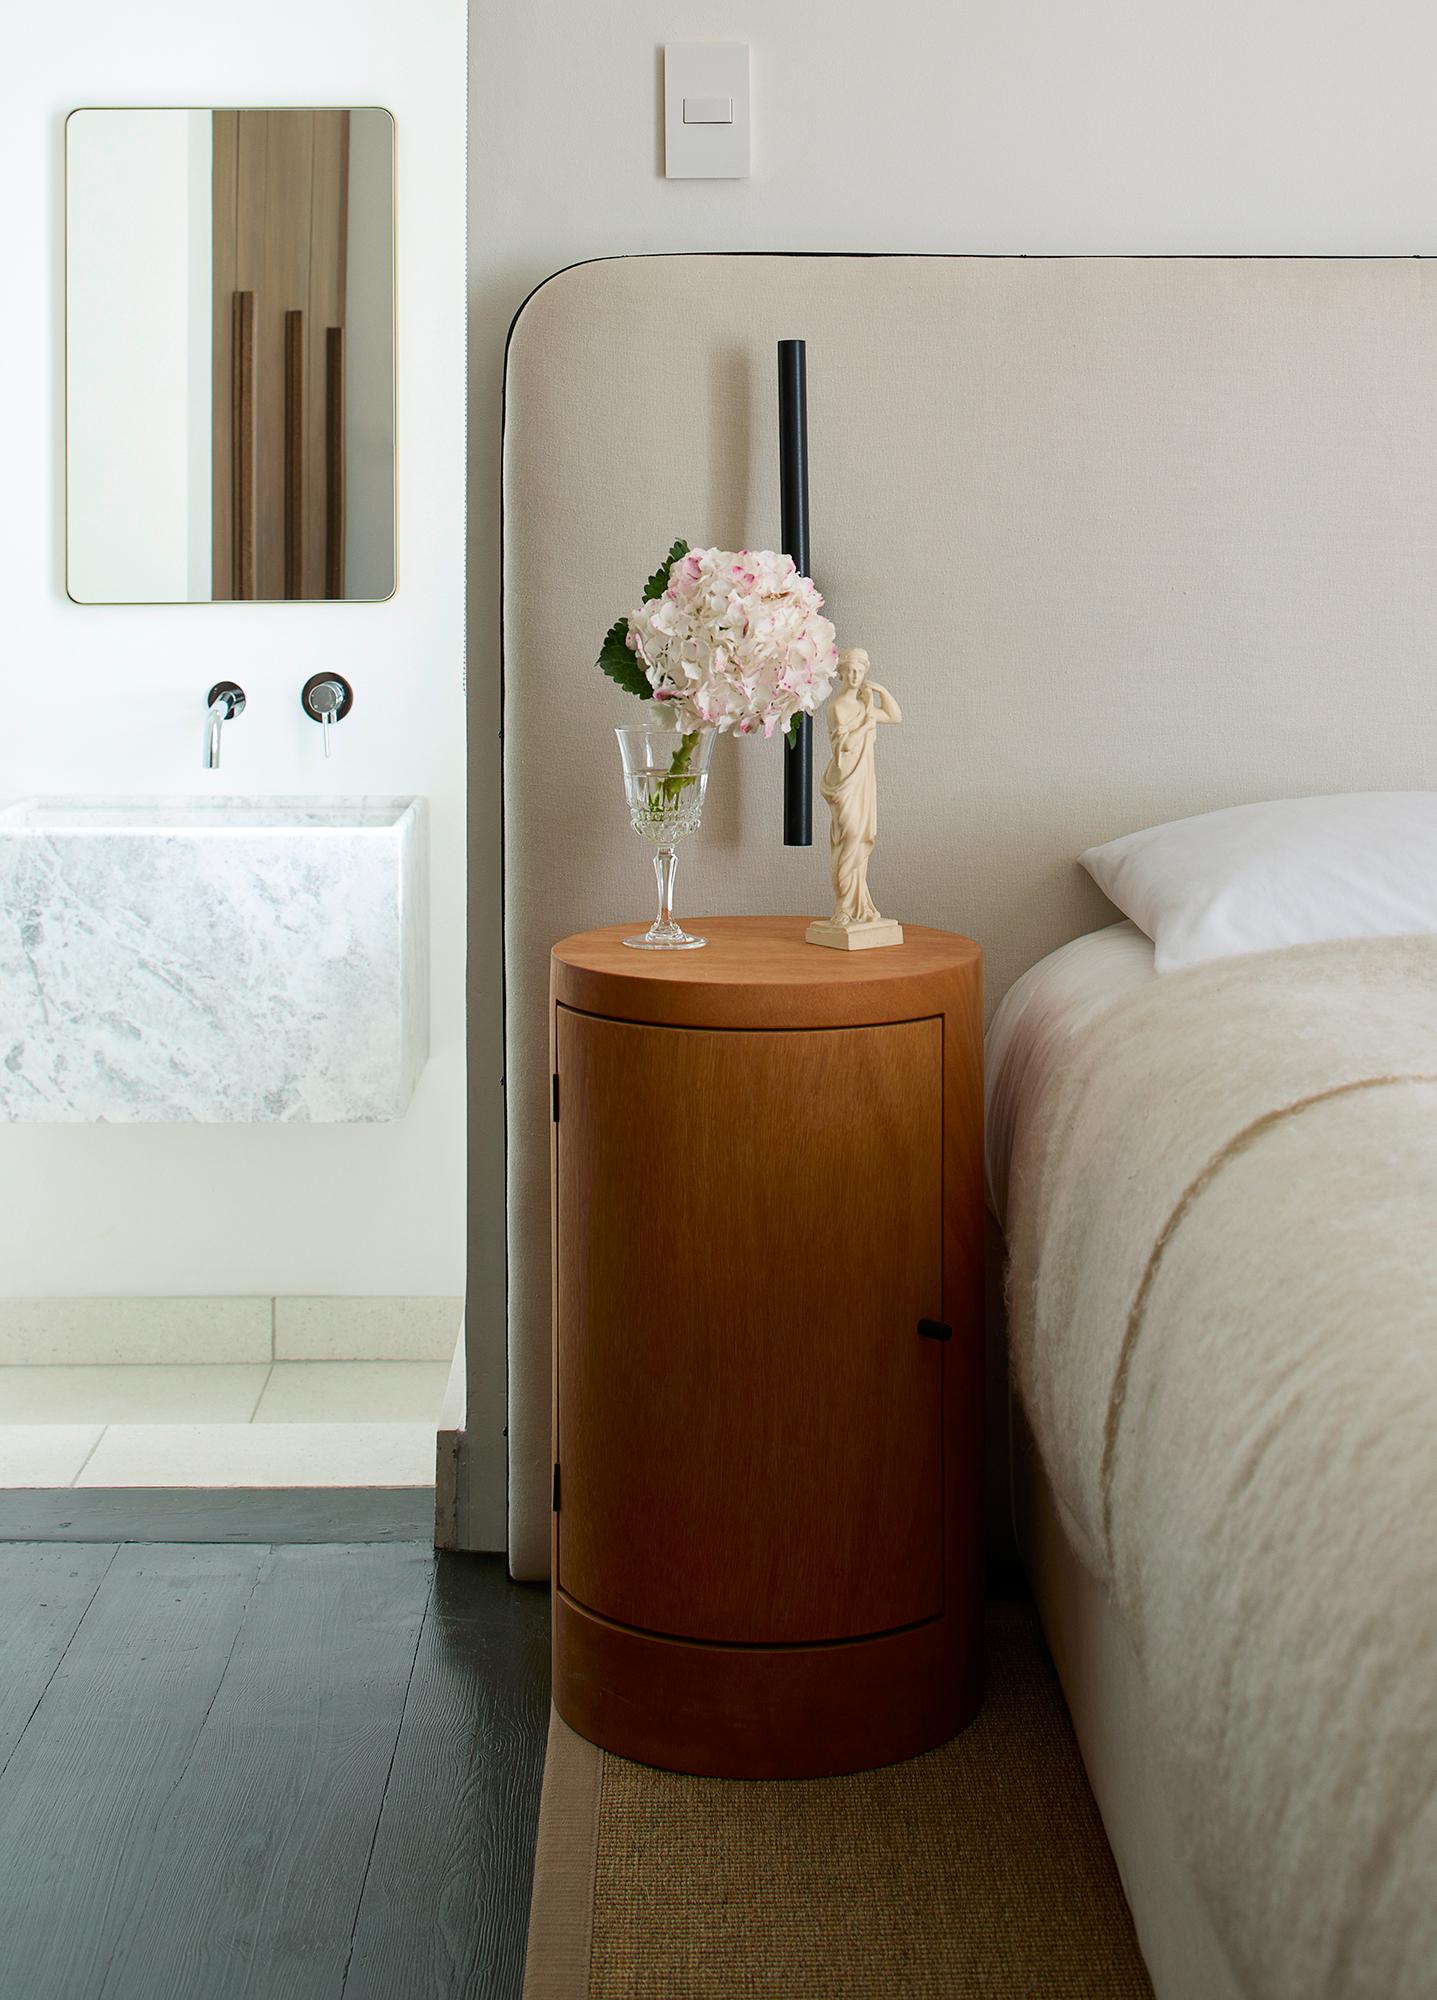 Neatly proportioned with exceptional detailing, the constant nightstand is your perfect bedside partner. In our furniture making, the IDEA is to create special pieces that you can build a space around, whose designs highlight rather than overshadow